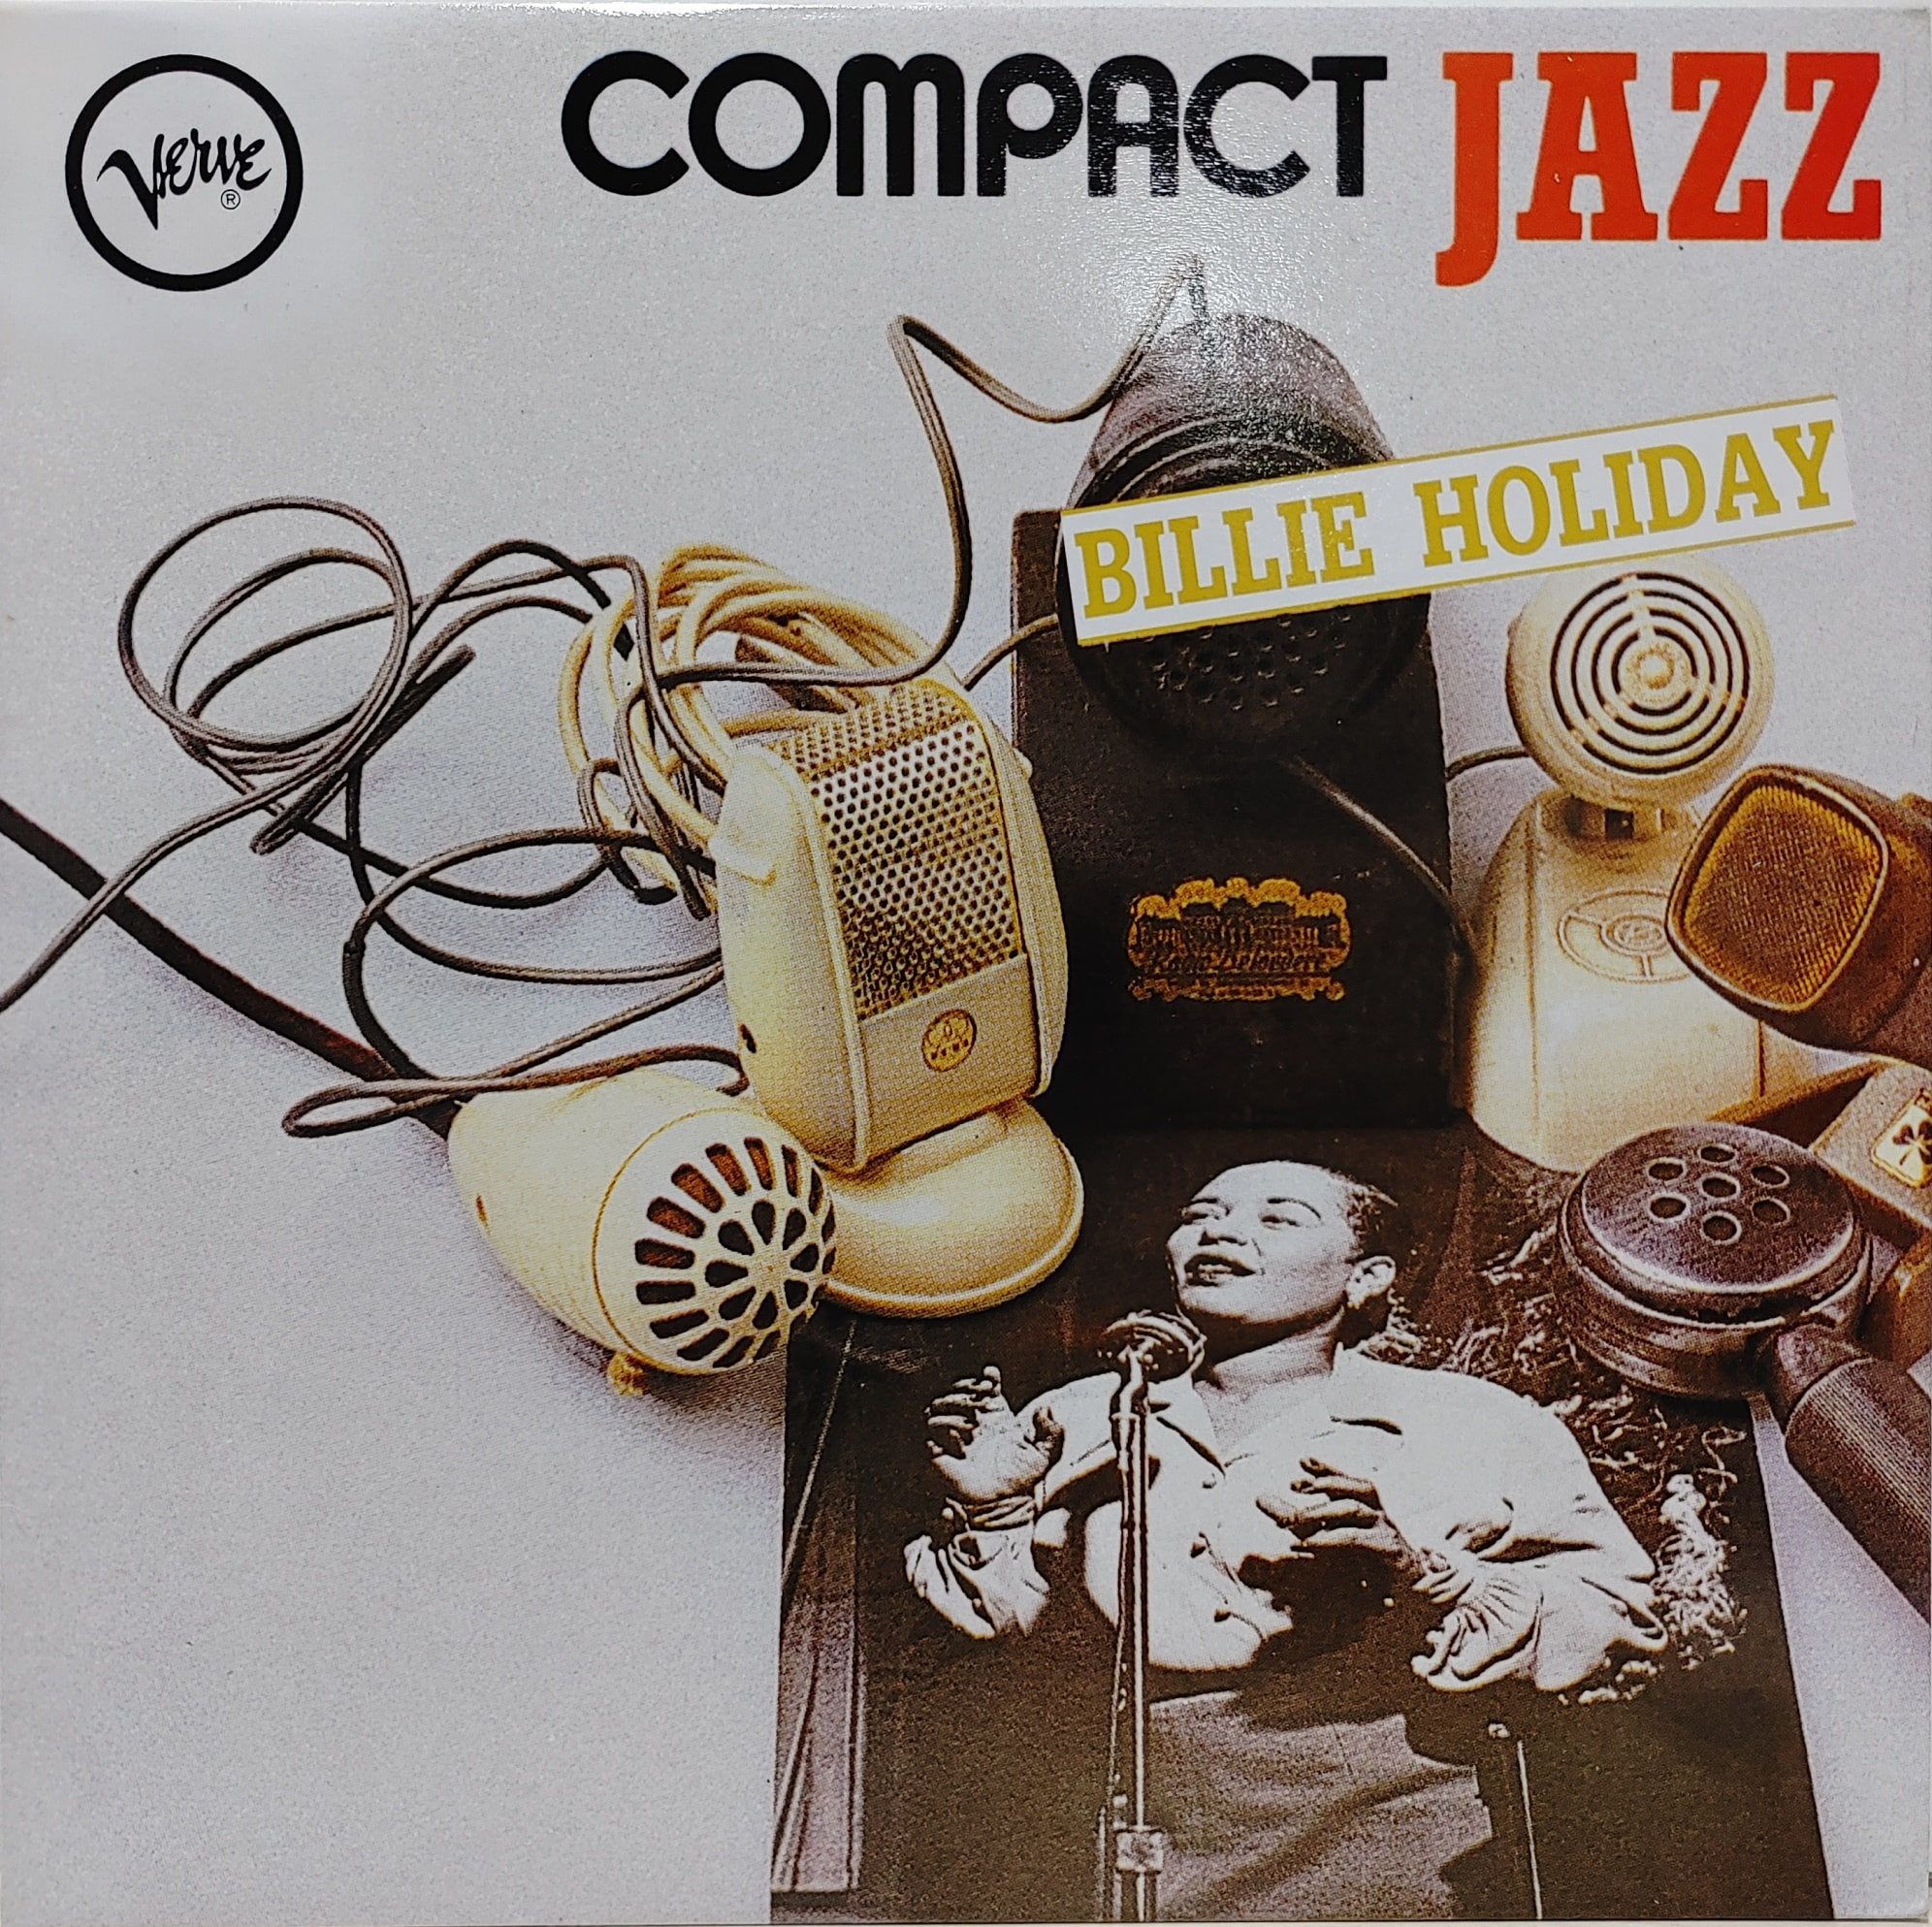 BILLIE HOLIDAY / COMPACT JAZZ